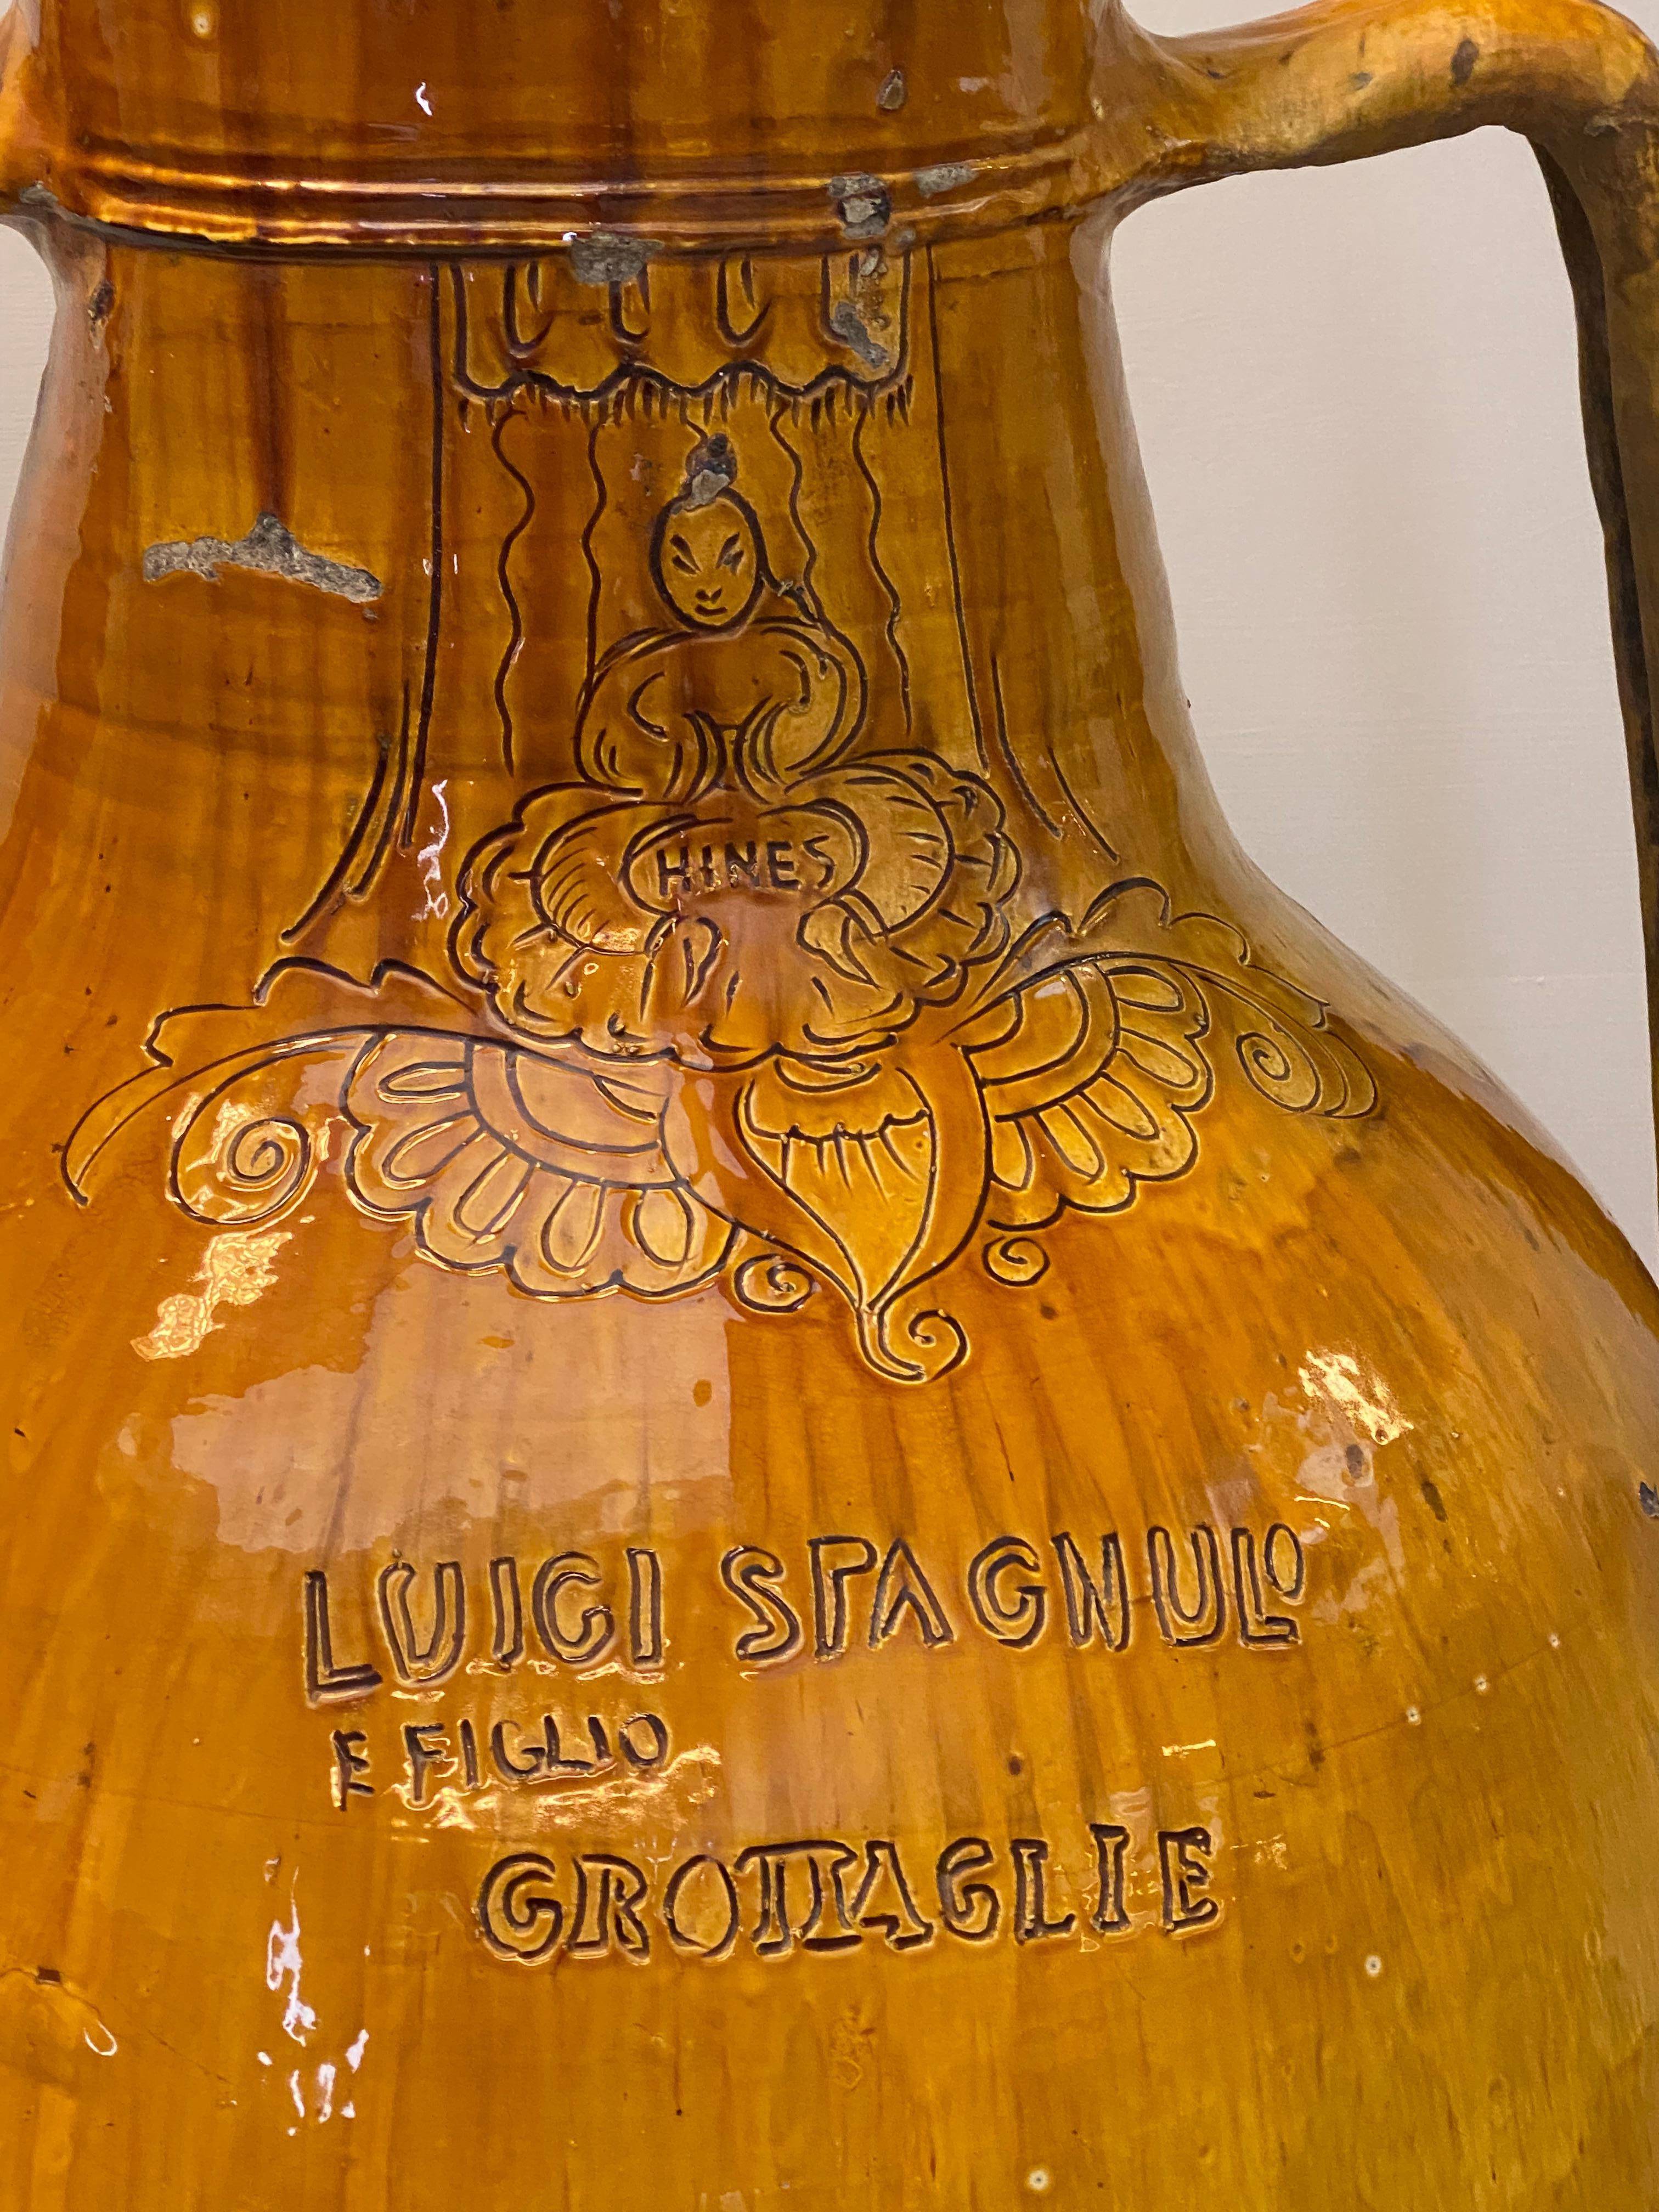 Beautiful Italian Terracotta Olive Oil Jar,
South Of Italy, Puglia Region,
nice brown-yellow color and great patina,
decorated and inscriptions,
Luigi Spagnulo & Figlio.